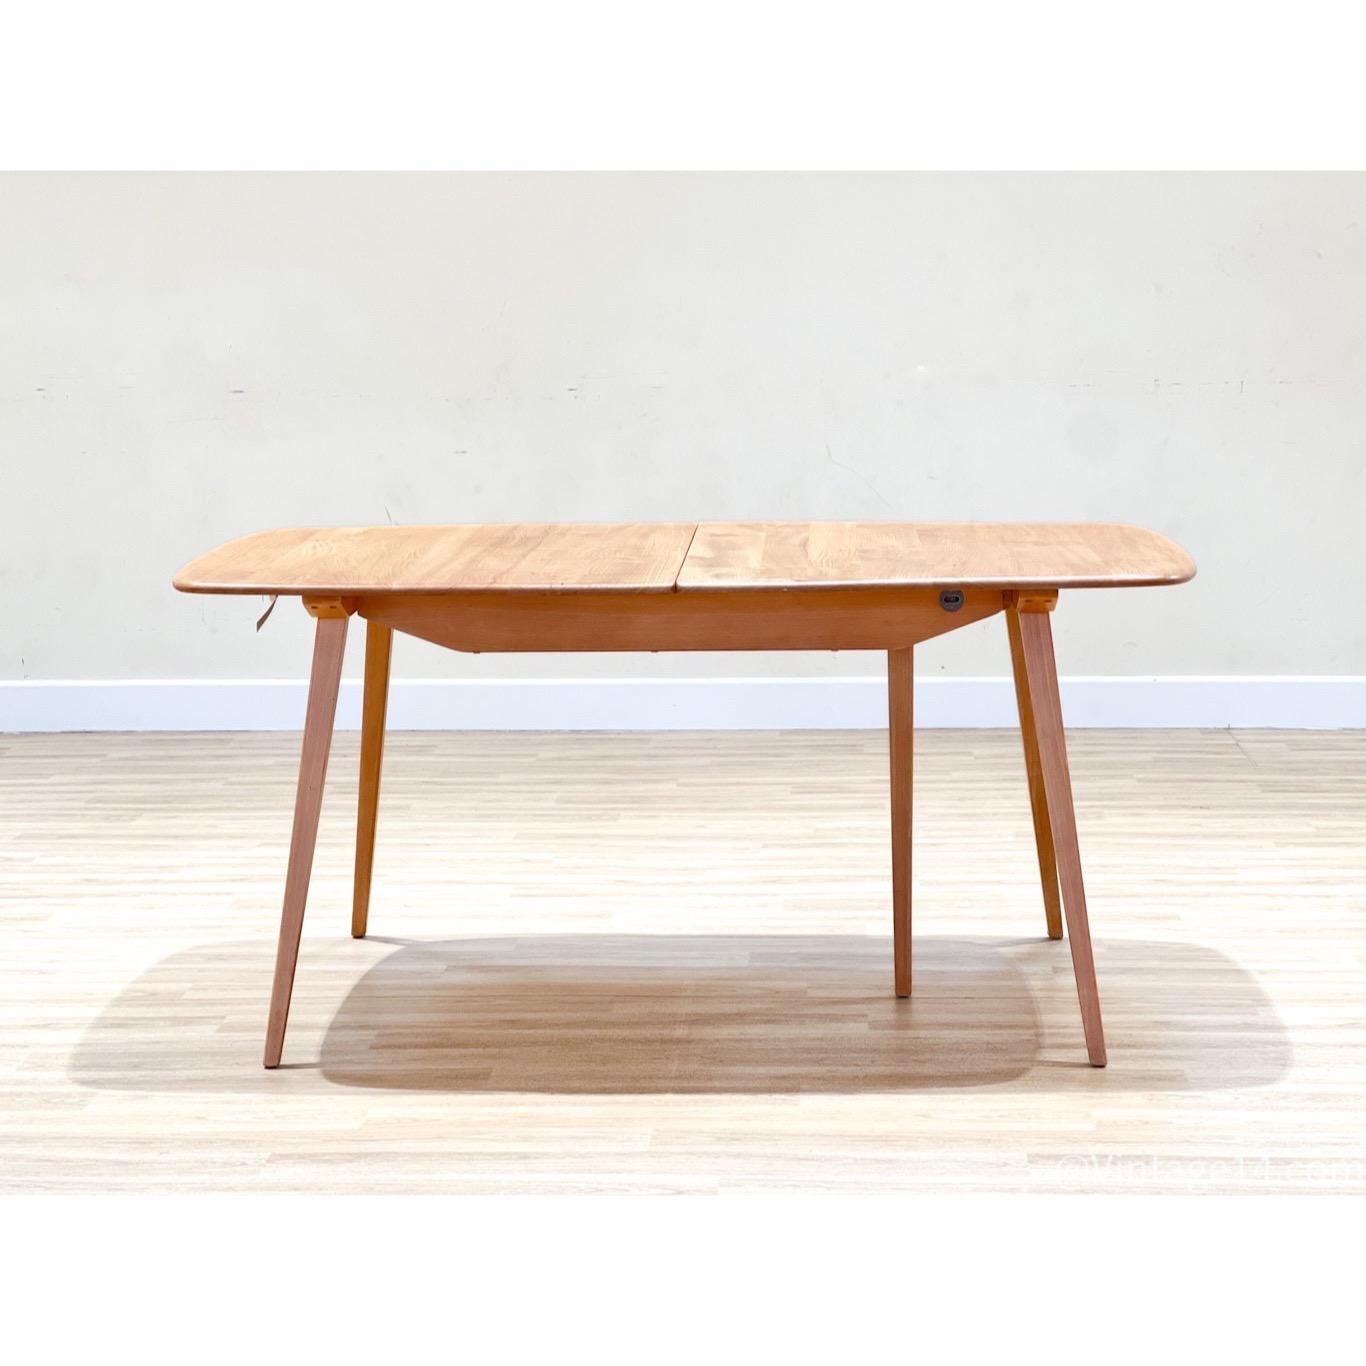 ucian Ercolani designed this table for Ercol in England in the ’60s. This is the Grand Windsor extending table model 444 Ercol made in the early ’60s.

The table is handcrafted in a beautiful elm; the feature of this elm is the beauty of the elmwood